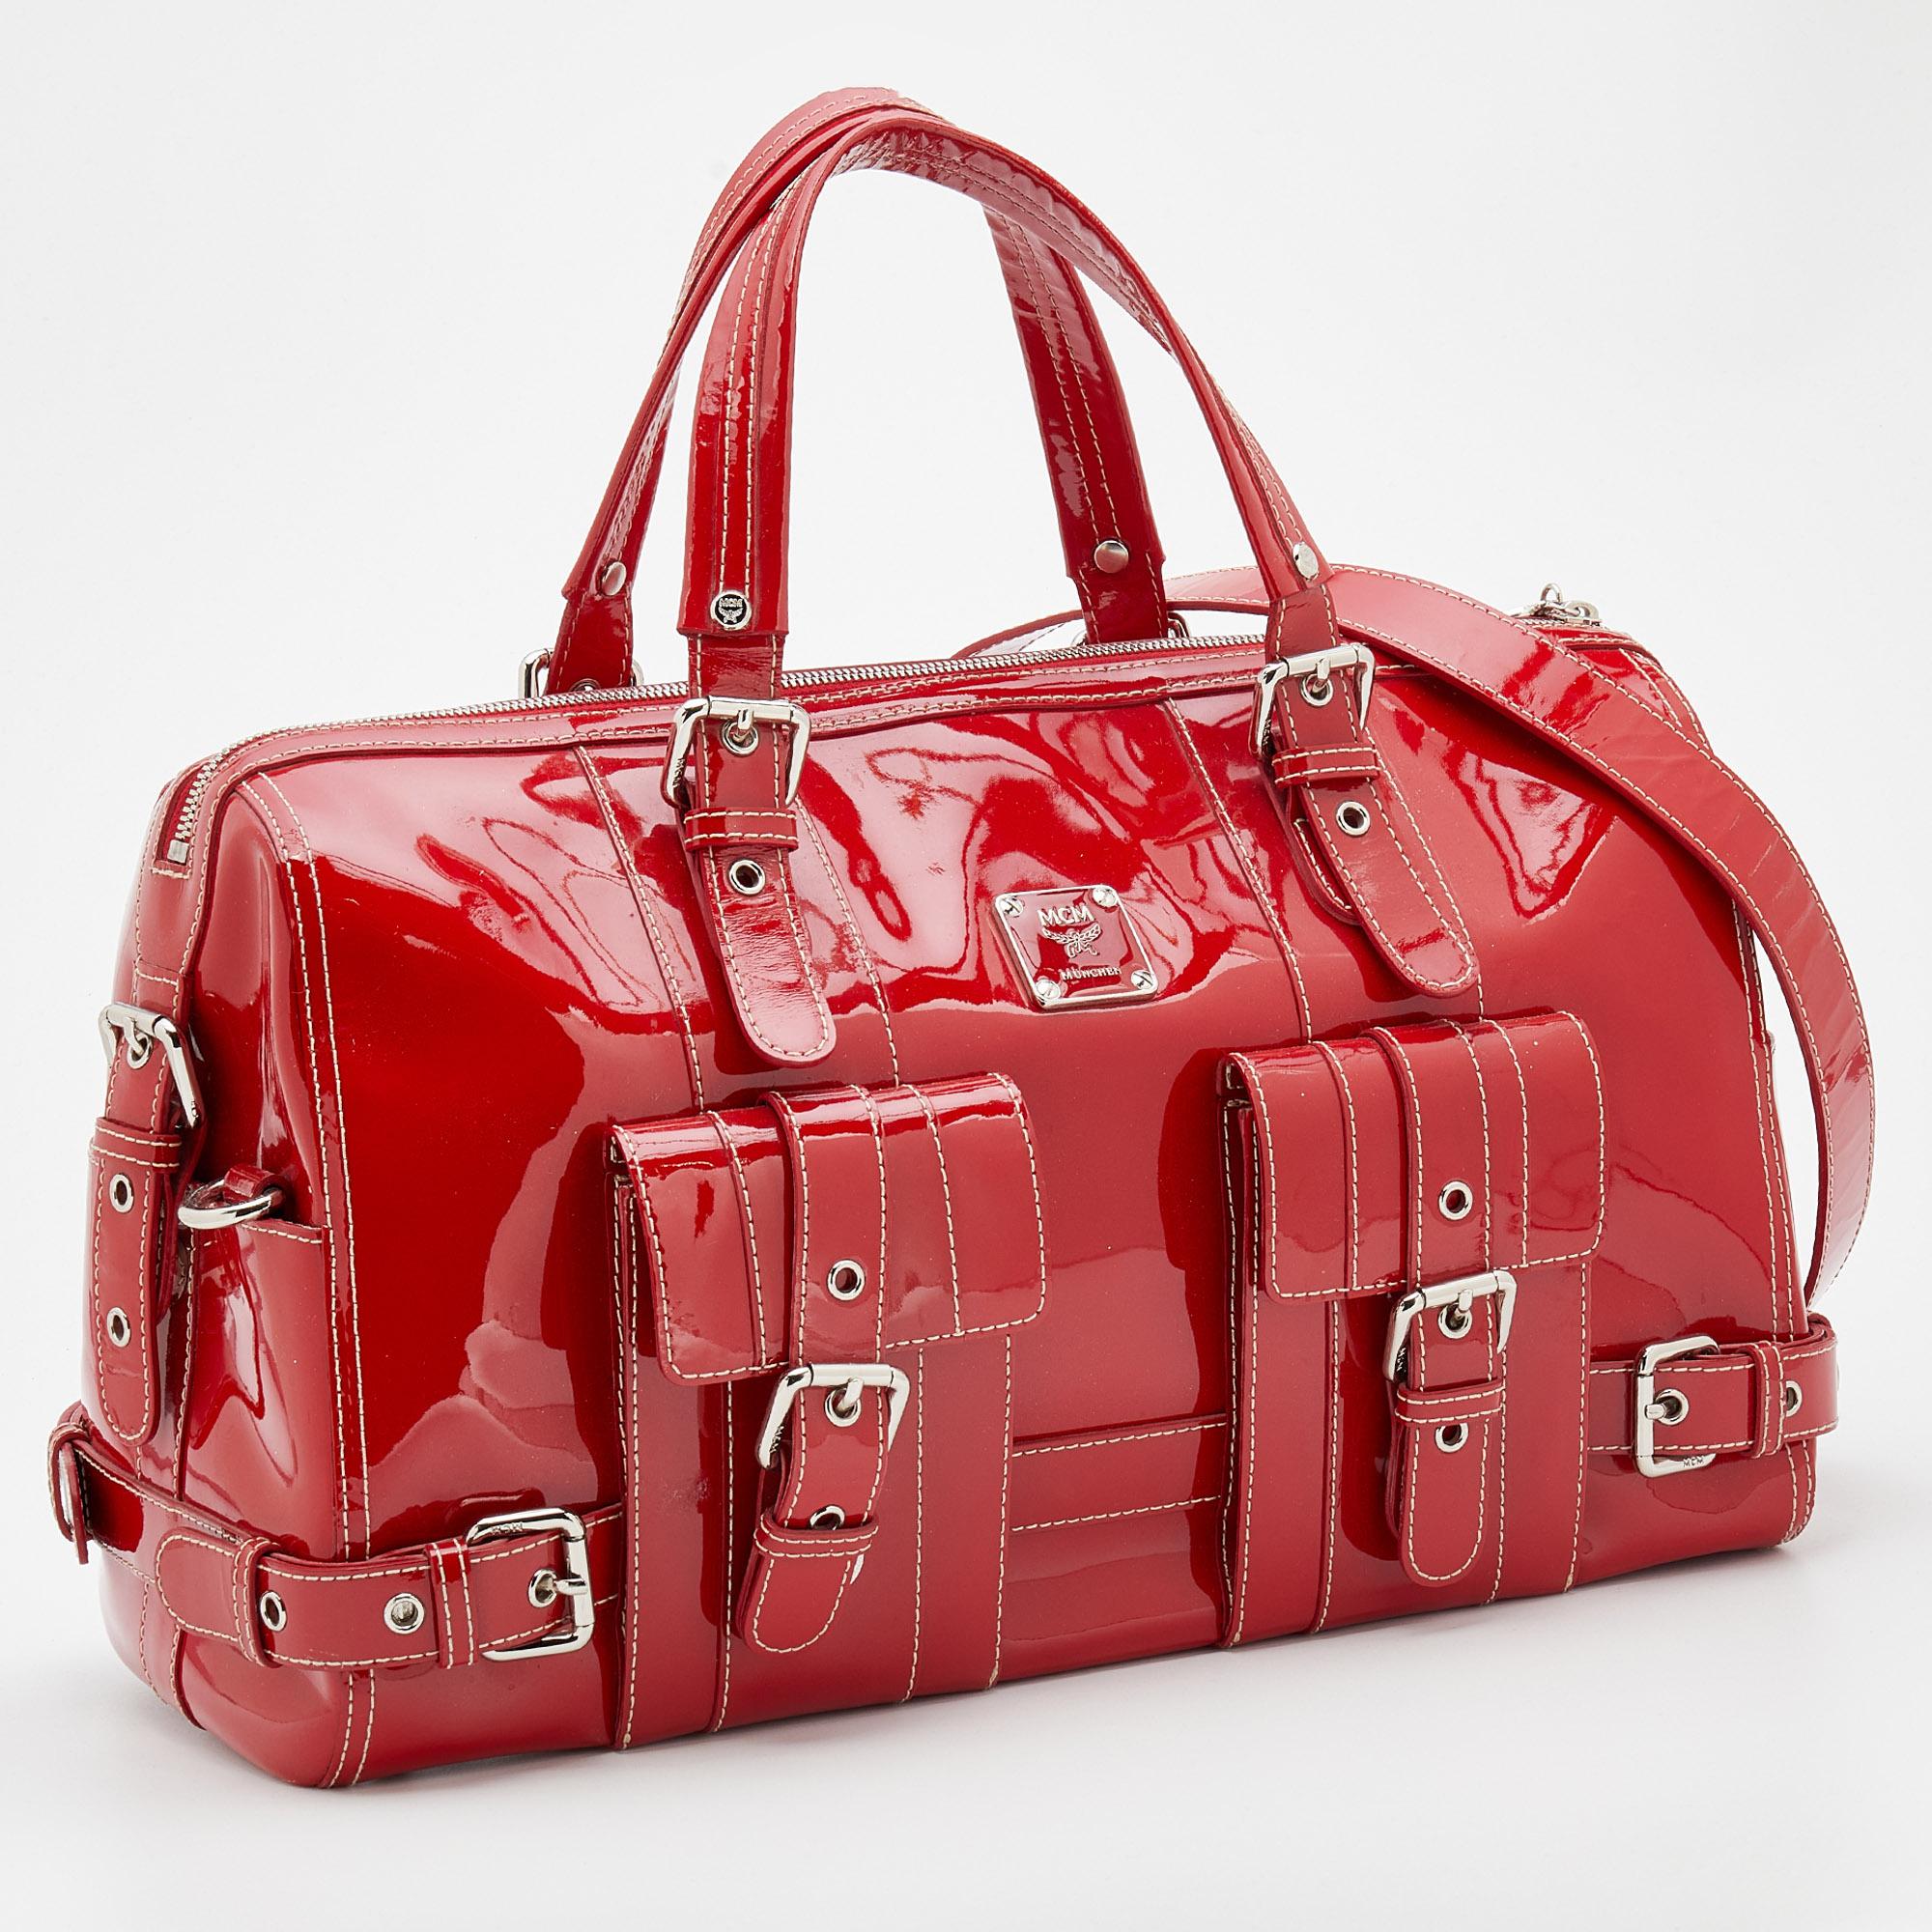 MCM Red Patent Leather Duffle Bag 1